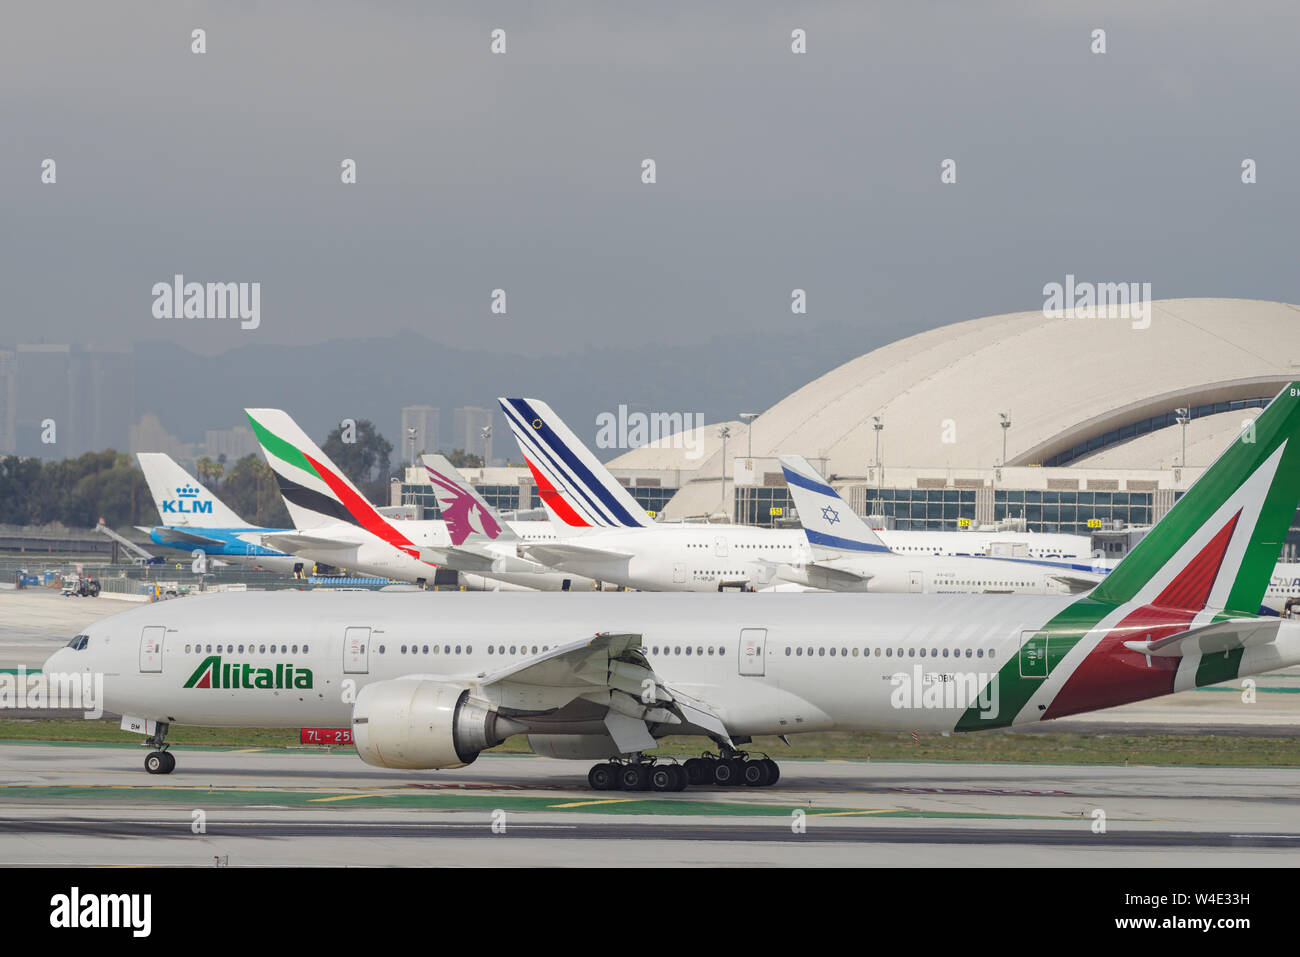 Alitalia Boeing 777 aircraft shown taxiing at LAX. A number of non-American jets are visible in the background. Stock Photo